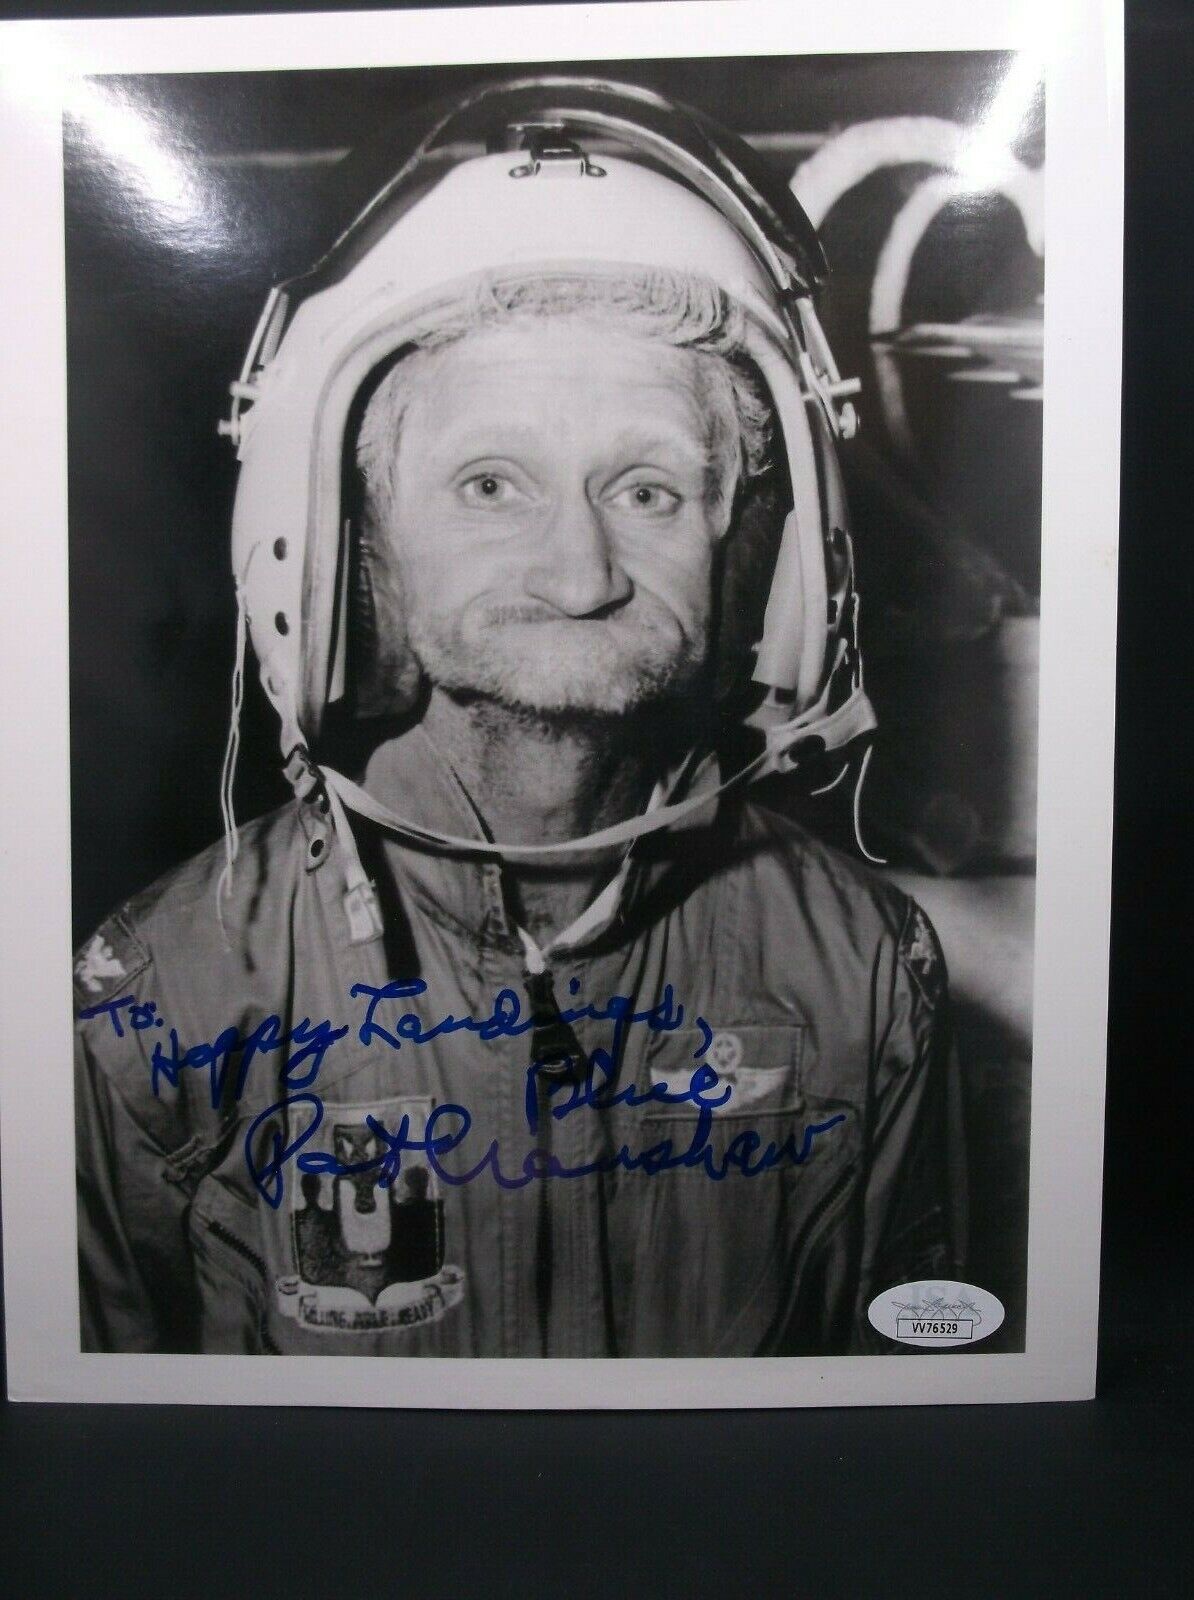 PAT CRANSHAW Autographed/Signed 8x10 Photo Blue from Old School